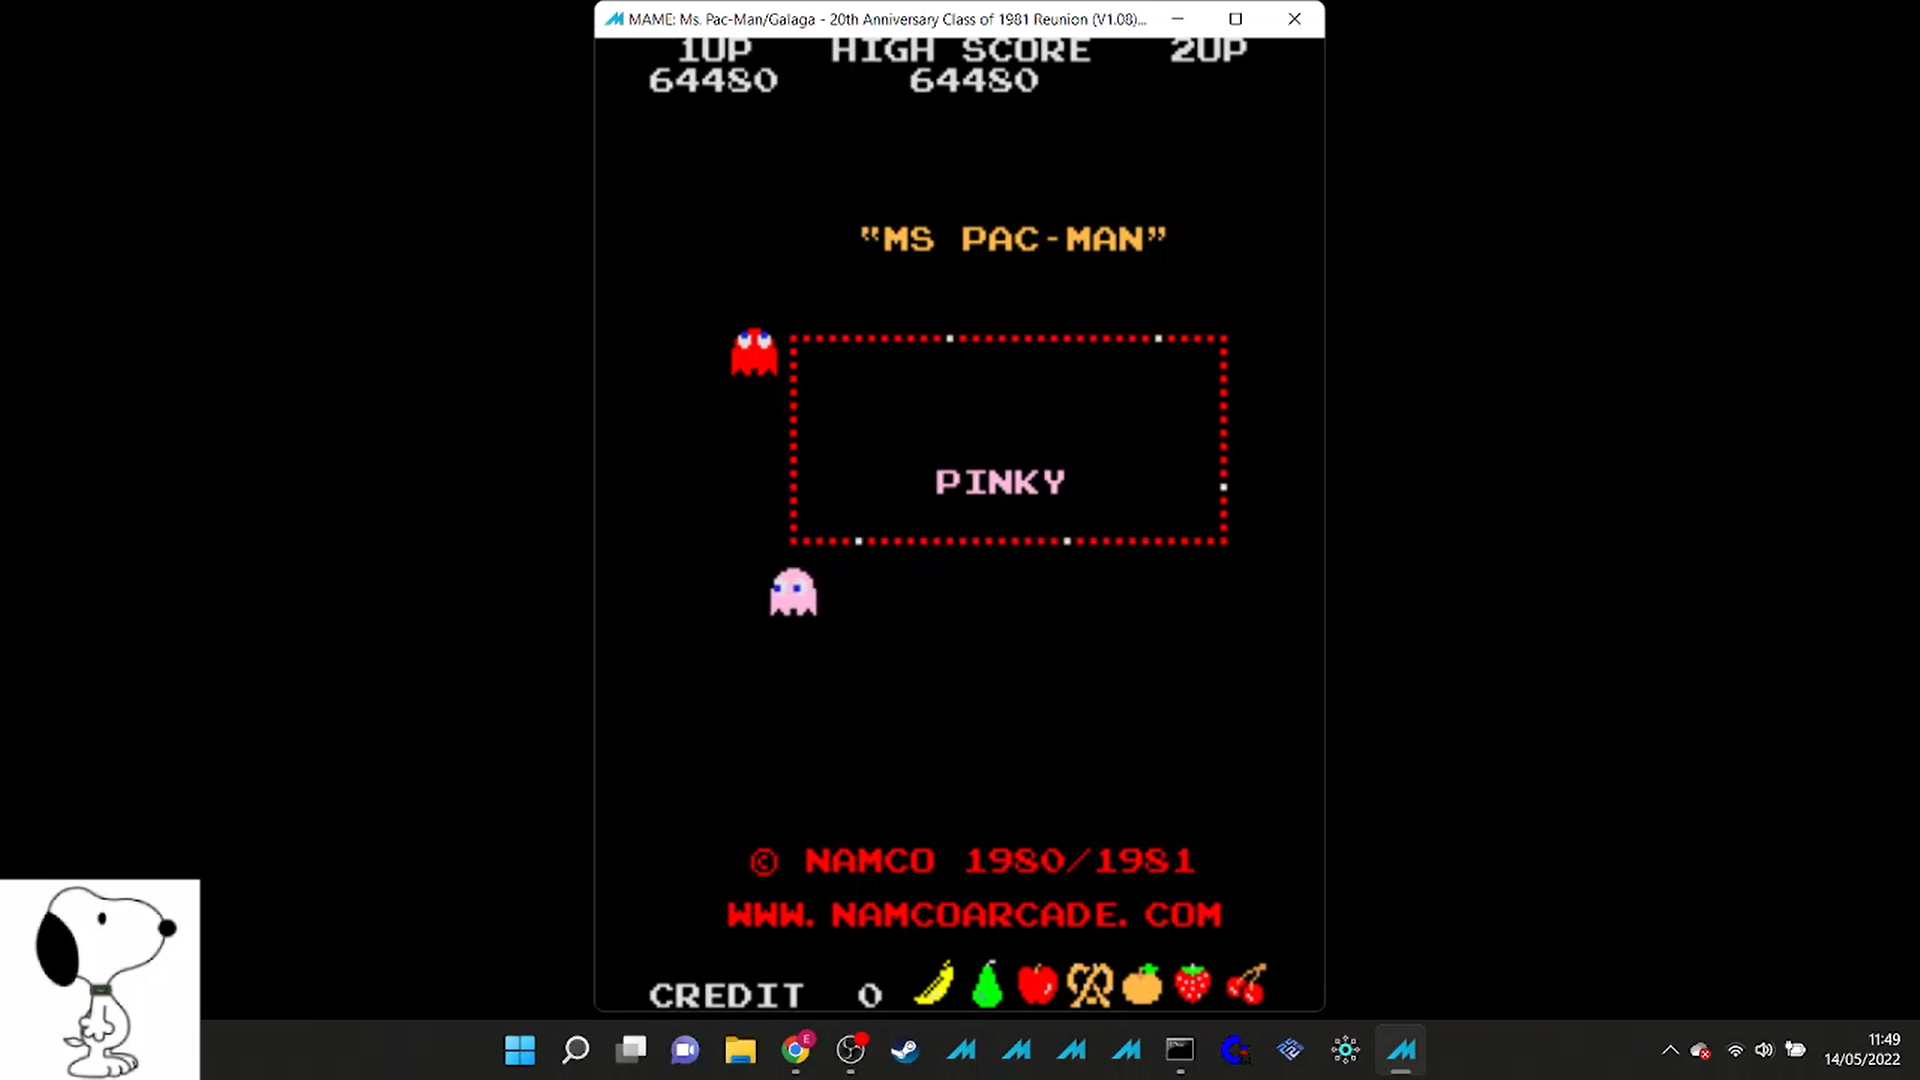 Ms. Pacman/Galaga: Class of 1981: Ms. Pac-Man [20pacgal] 64,480 points